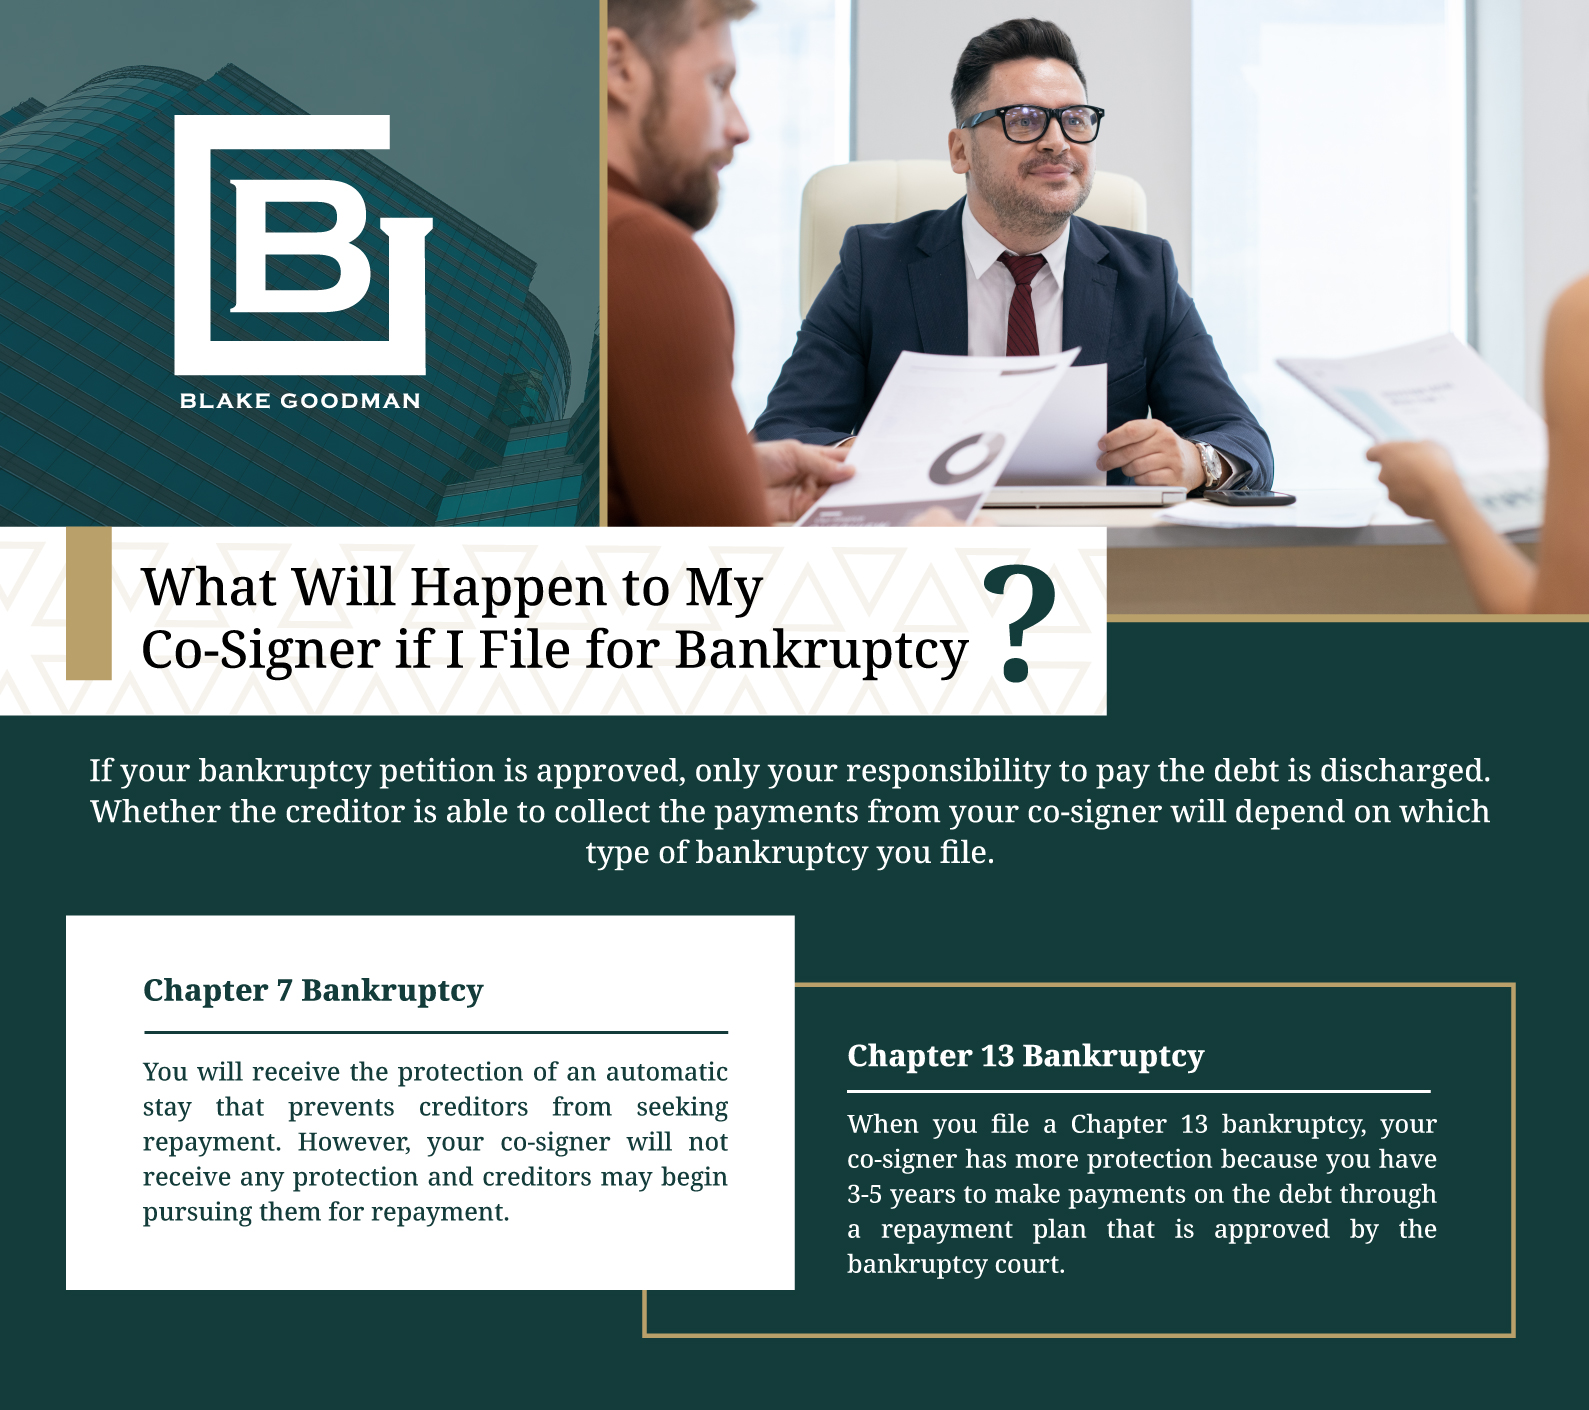 An infographic that shows what happens to a co-signer when filing for bankruptcy